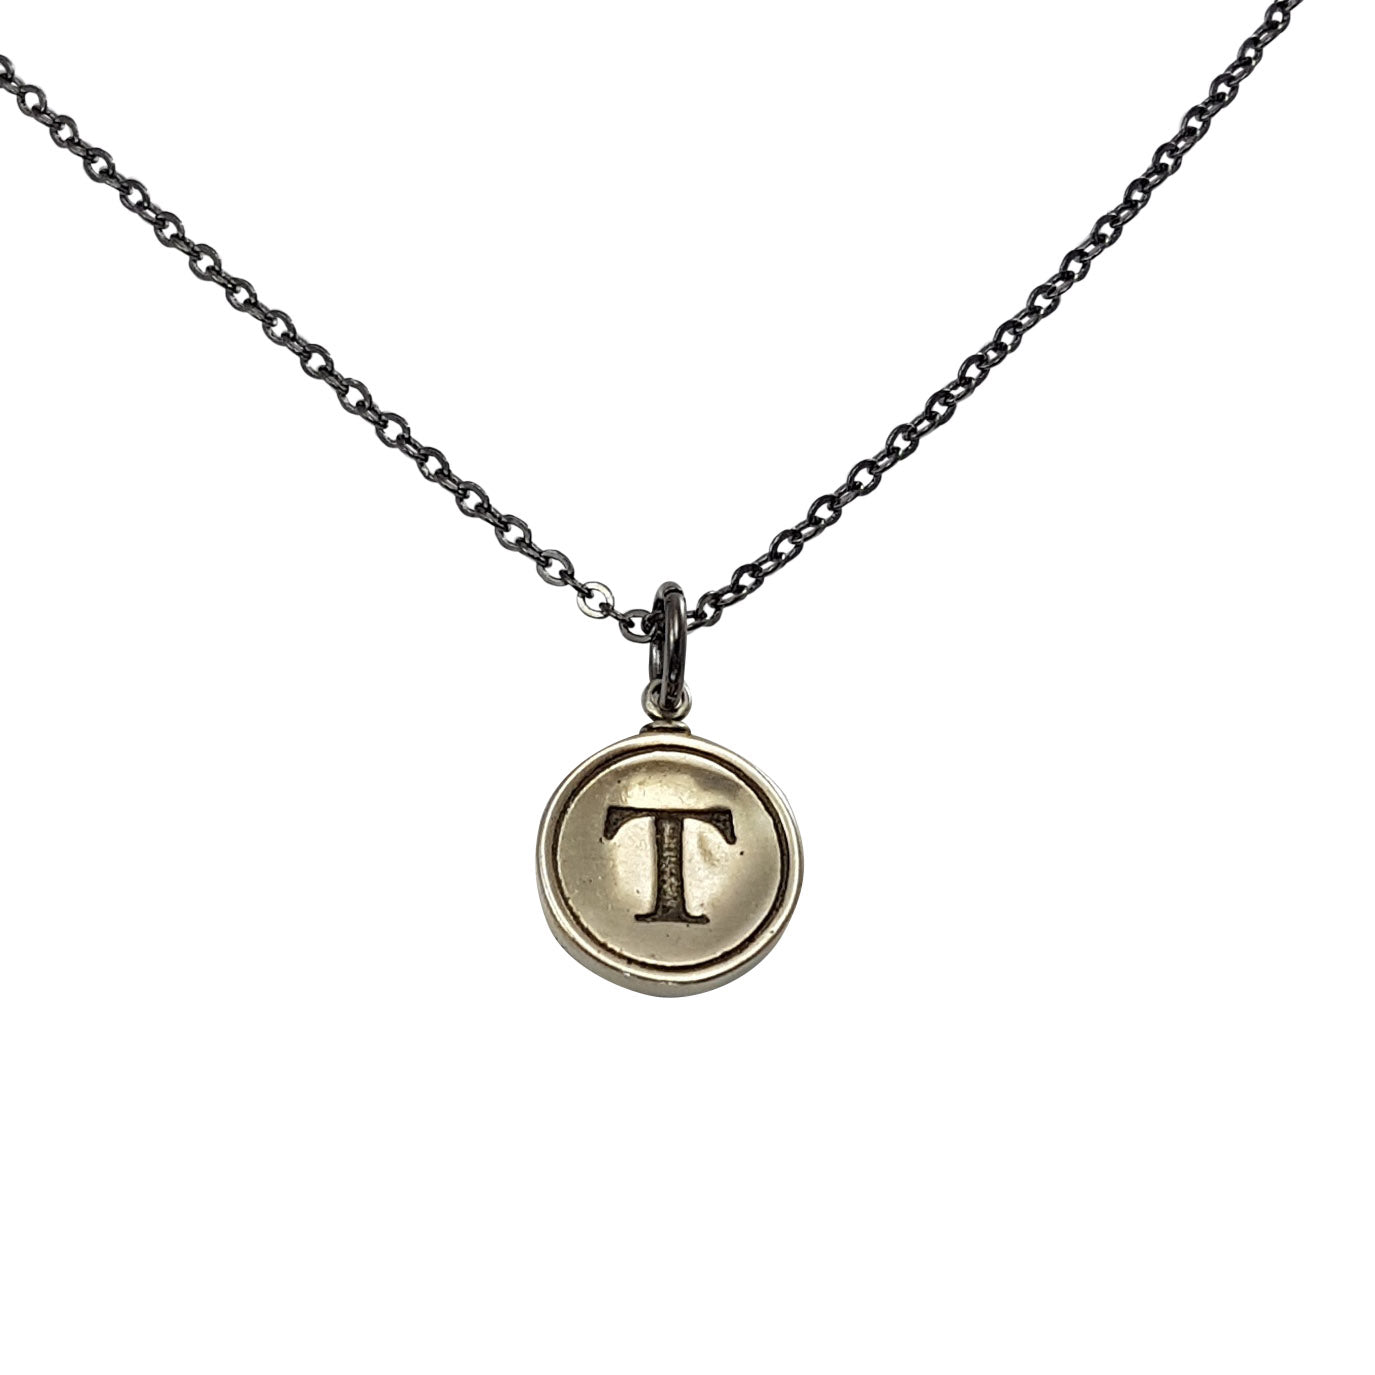 Initial Letter Necklace - Silver White Bronze - Gwen Delicious Jewelry Designs